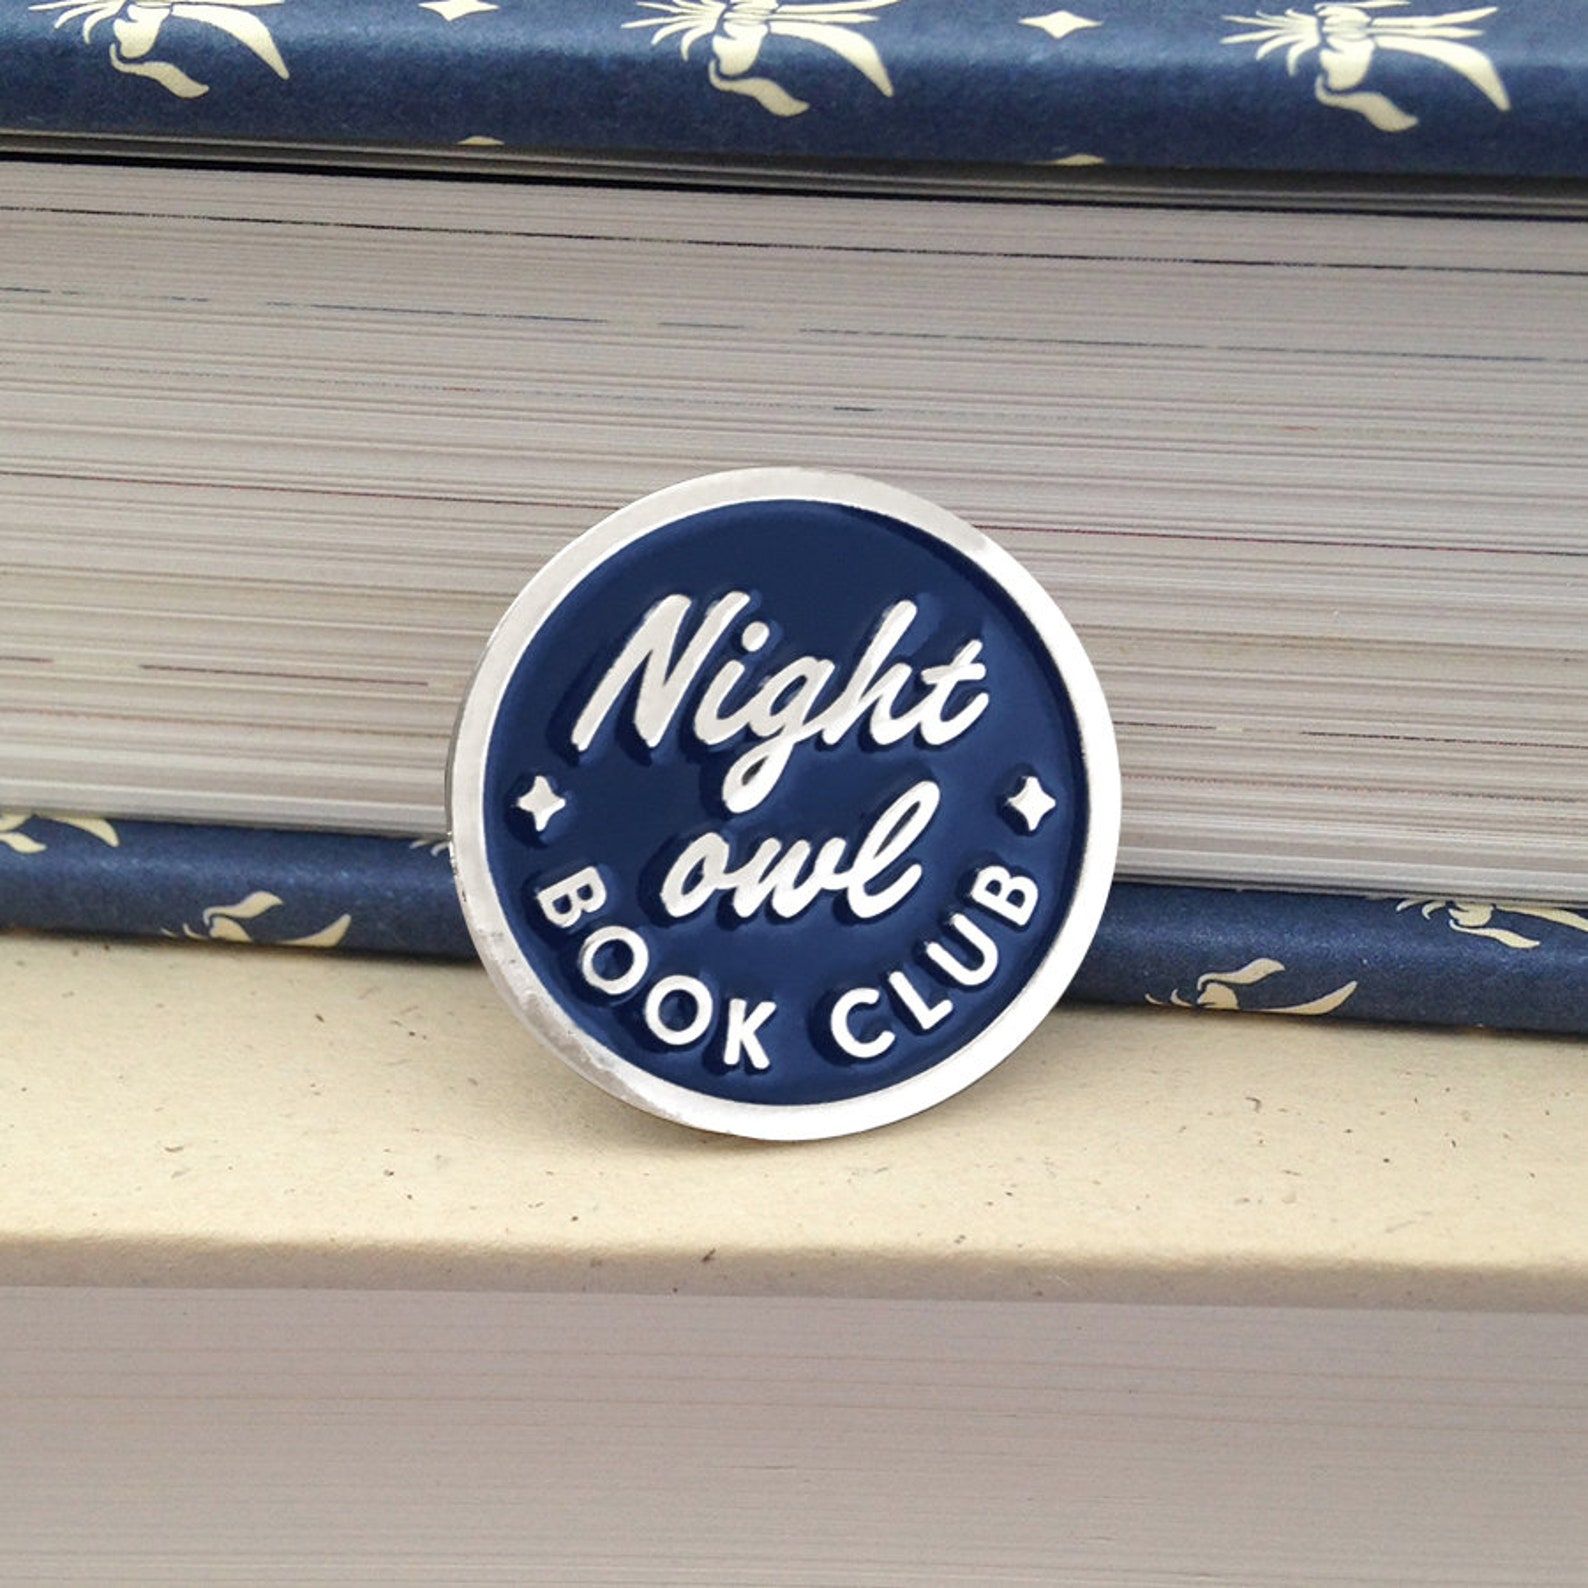 A round blue and solver enamel pin that reads 